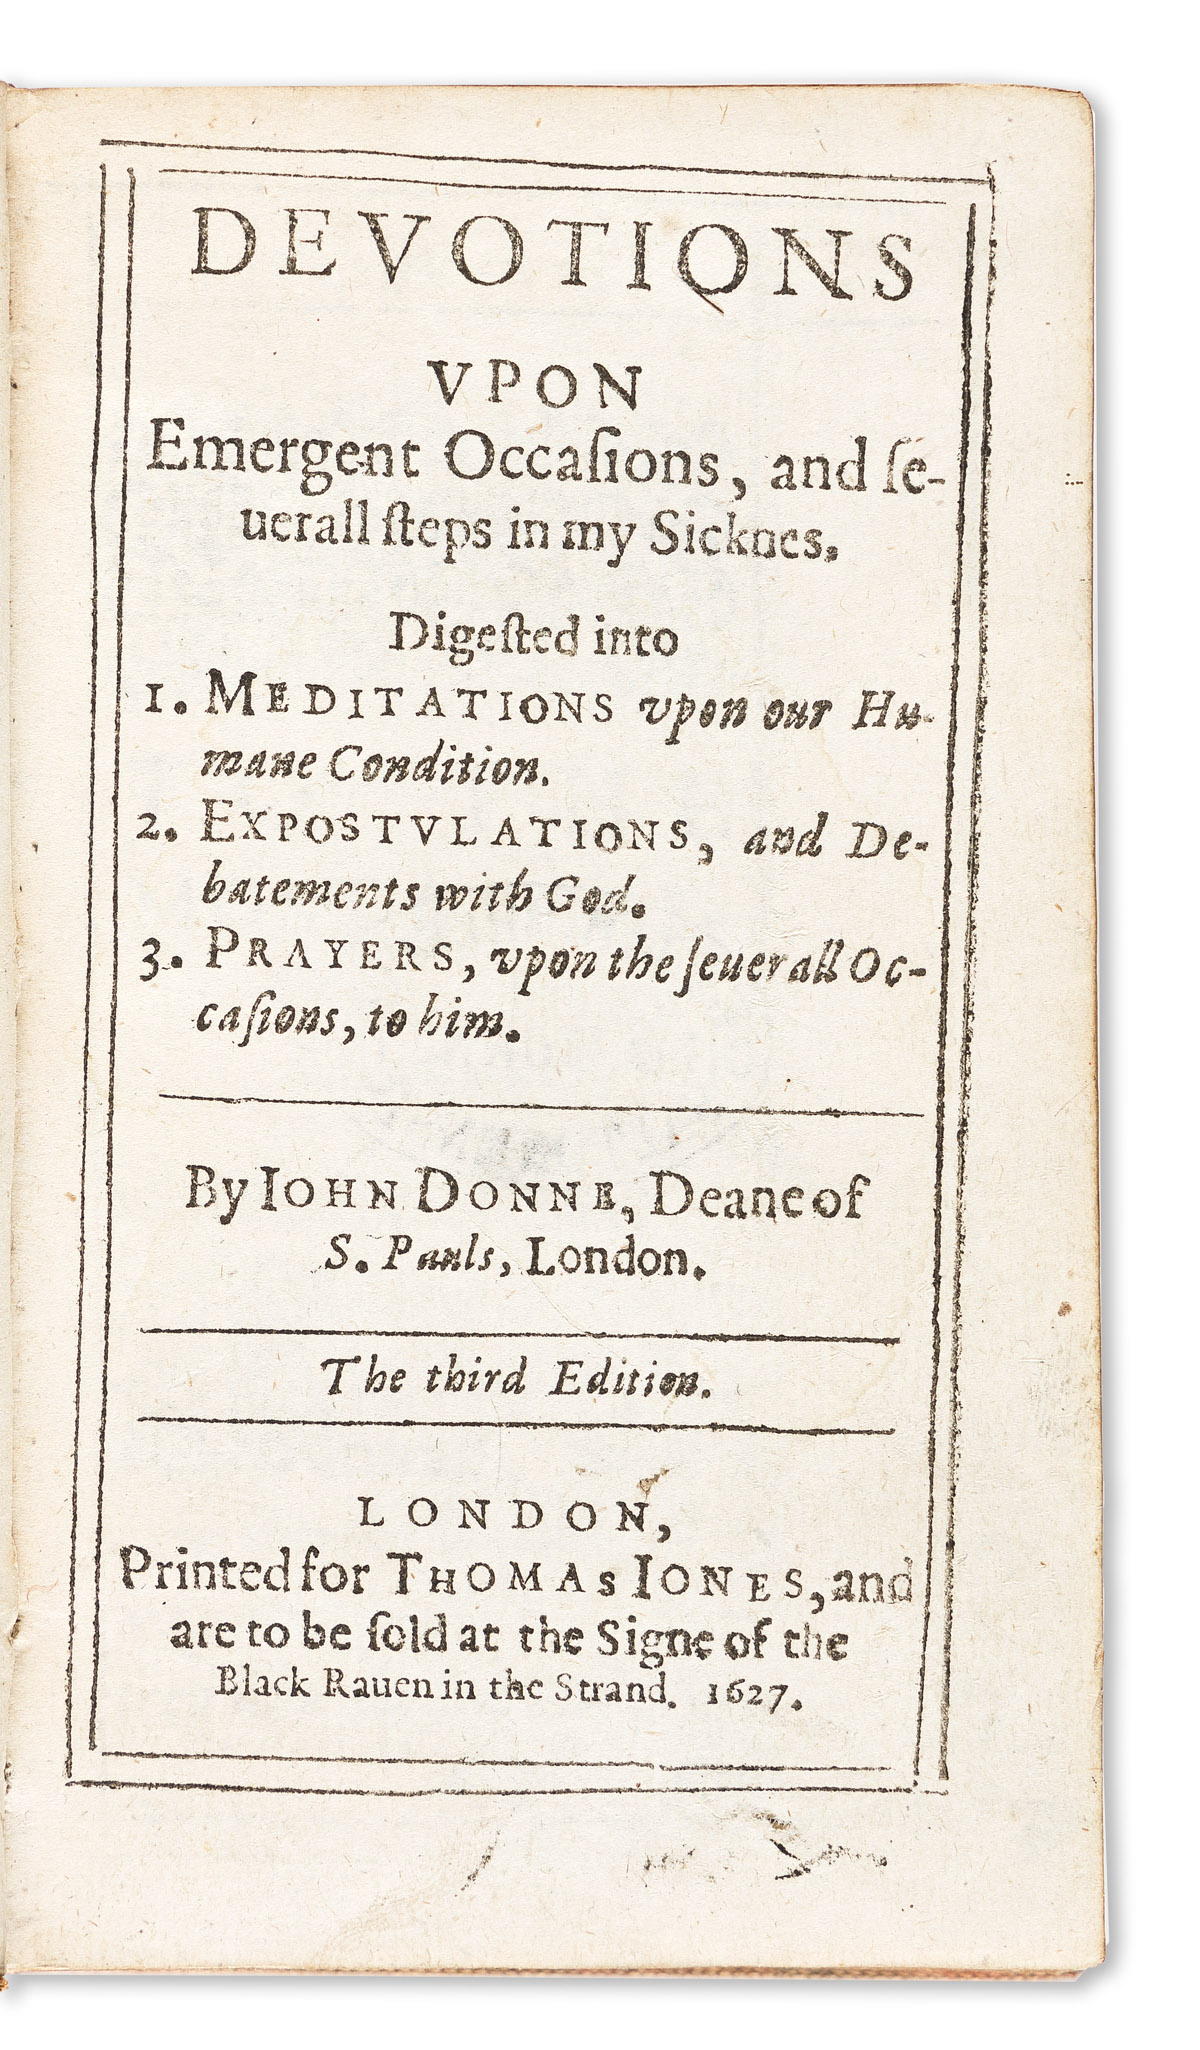 Donne, John (1572-1631) Devotions upon Emergent Occasions, and Severall Steps in my Sicknes.